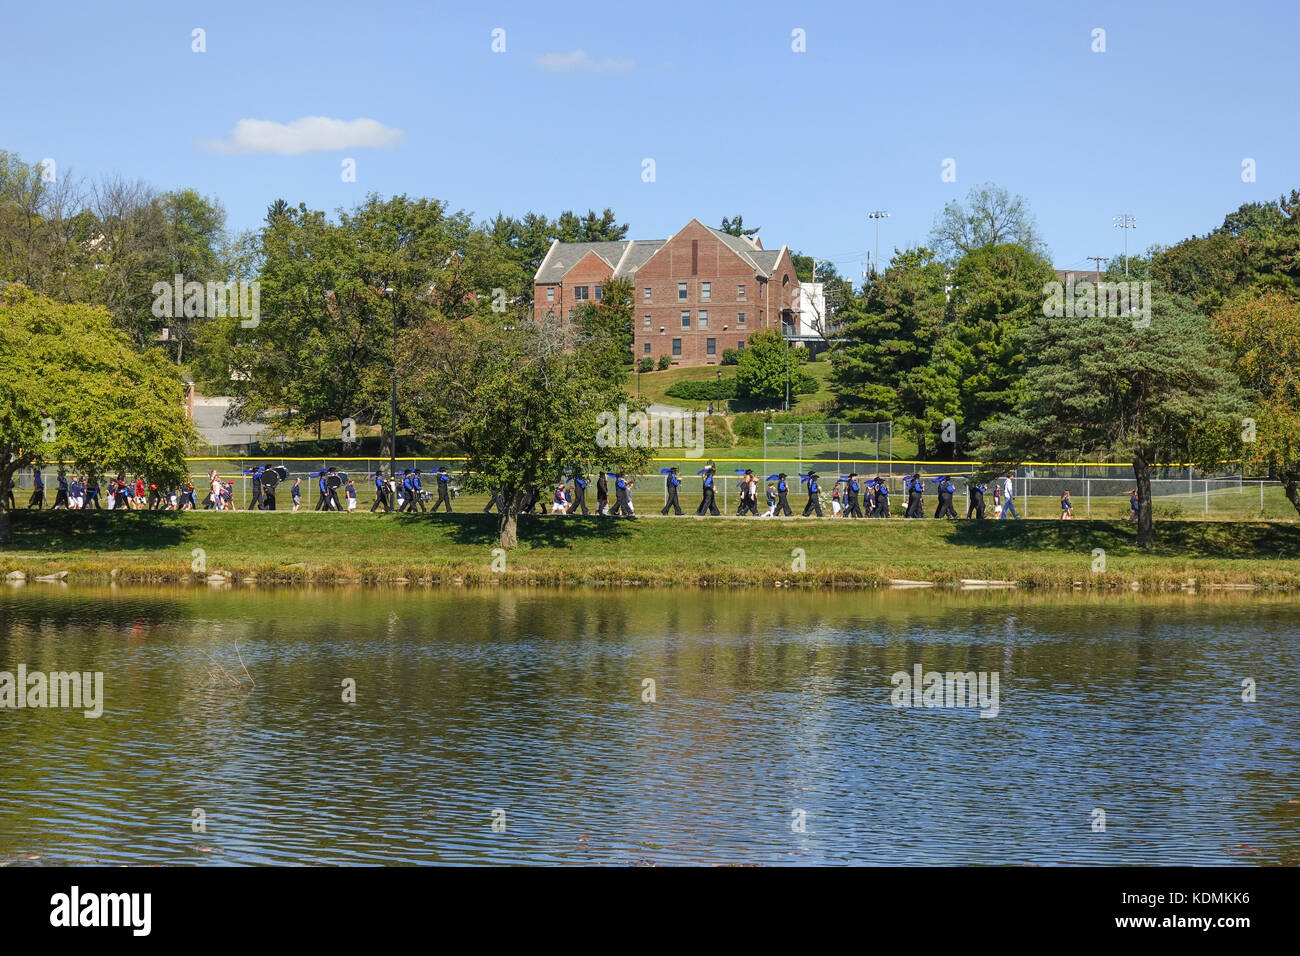 Marching band, Lake Muhlenberg, college behind, Allentown, PA, United states. Stock Photo